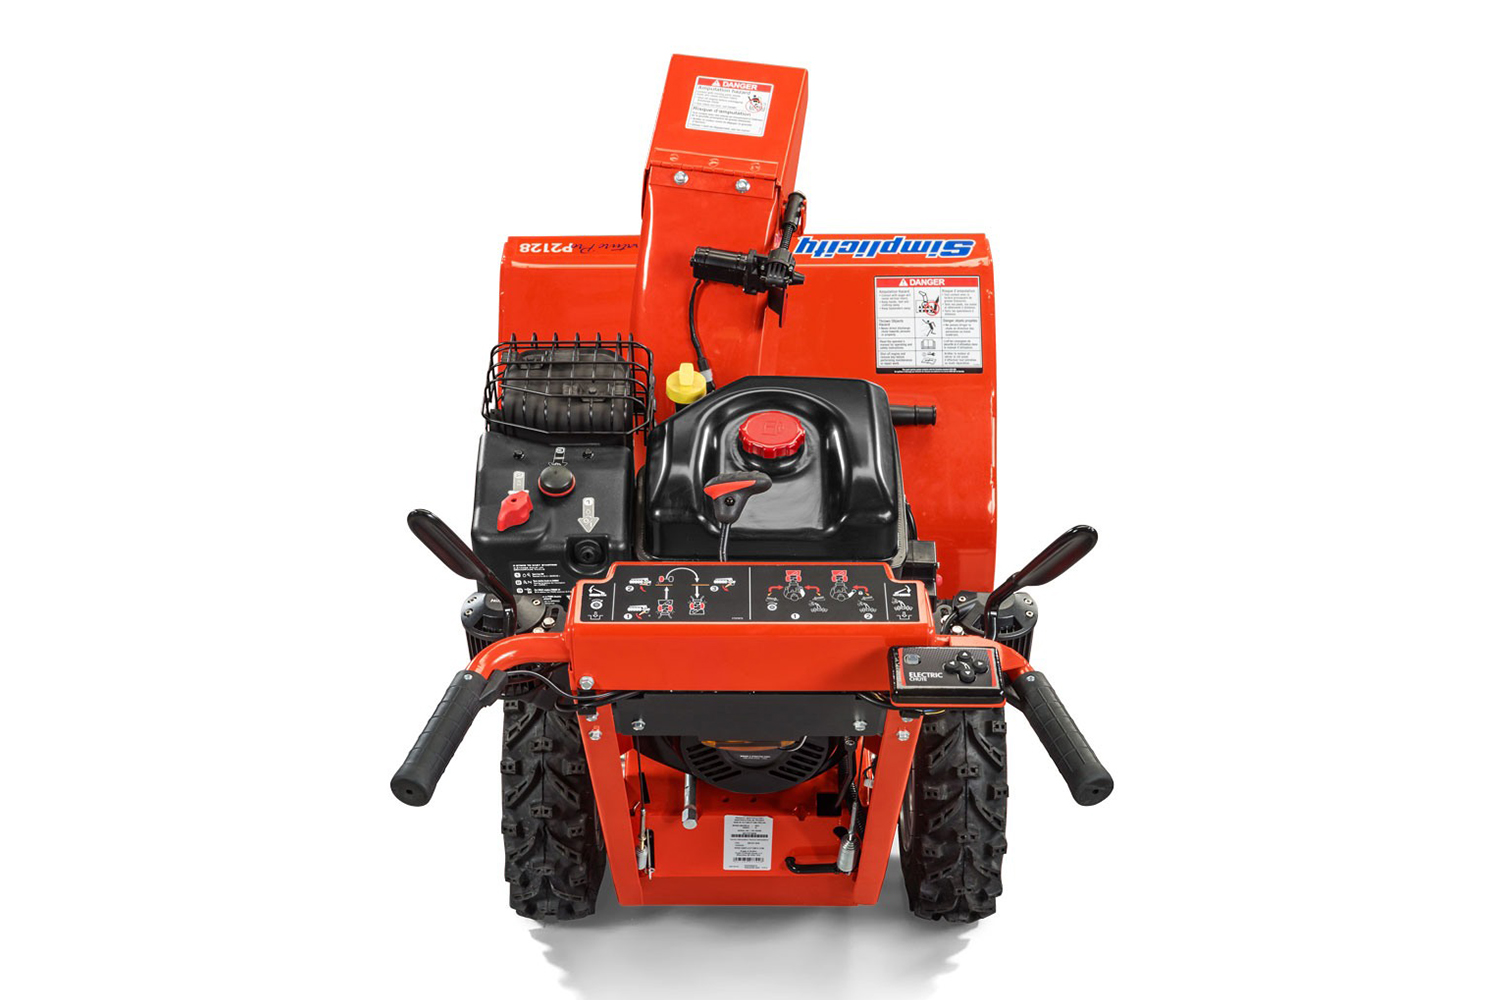 SIMPLICITY SIGNATURE PRO SERIES DUAL-STAGE SNOW BLOWER P1724<br/>*Model shown in image may vary.